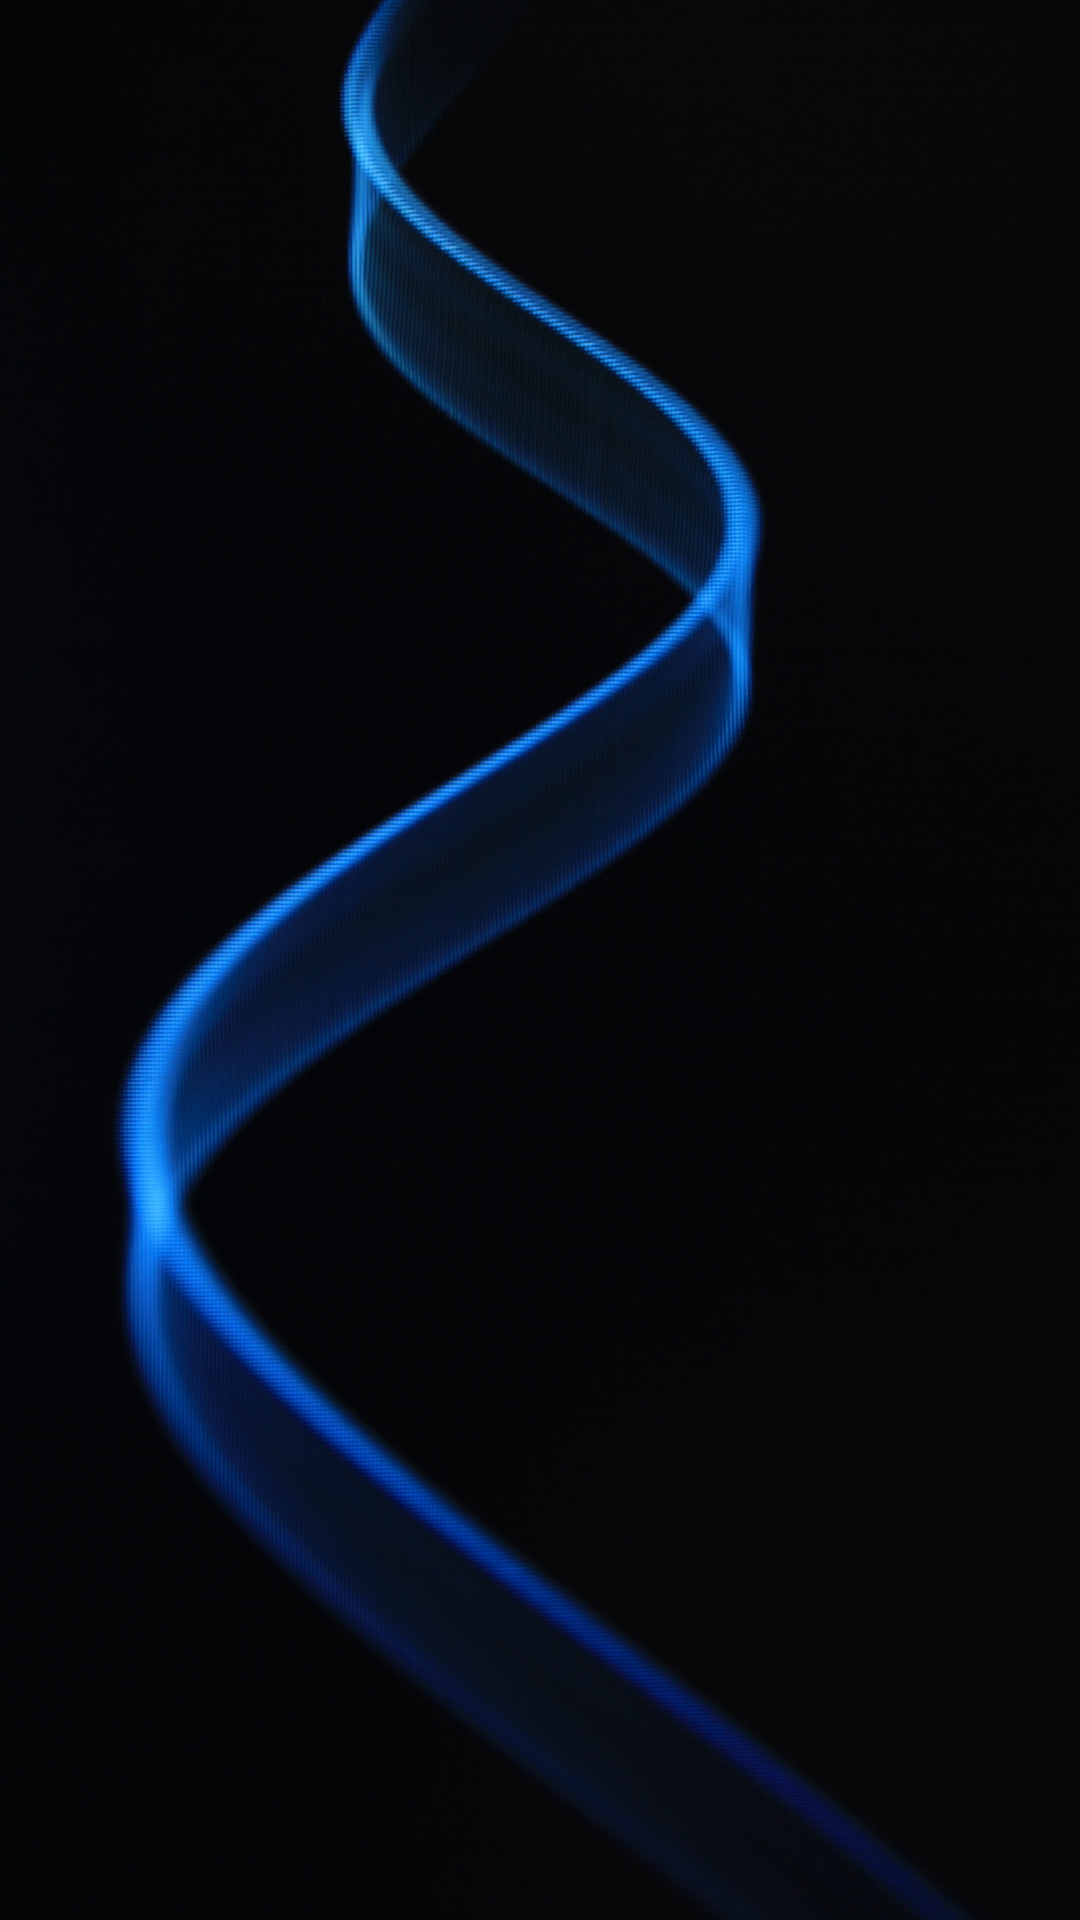 Background with blue design on black for galaxy s4 in 1080x1920 resolution